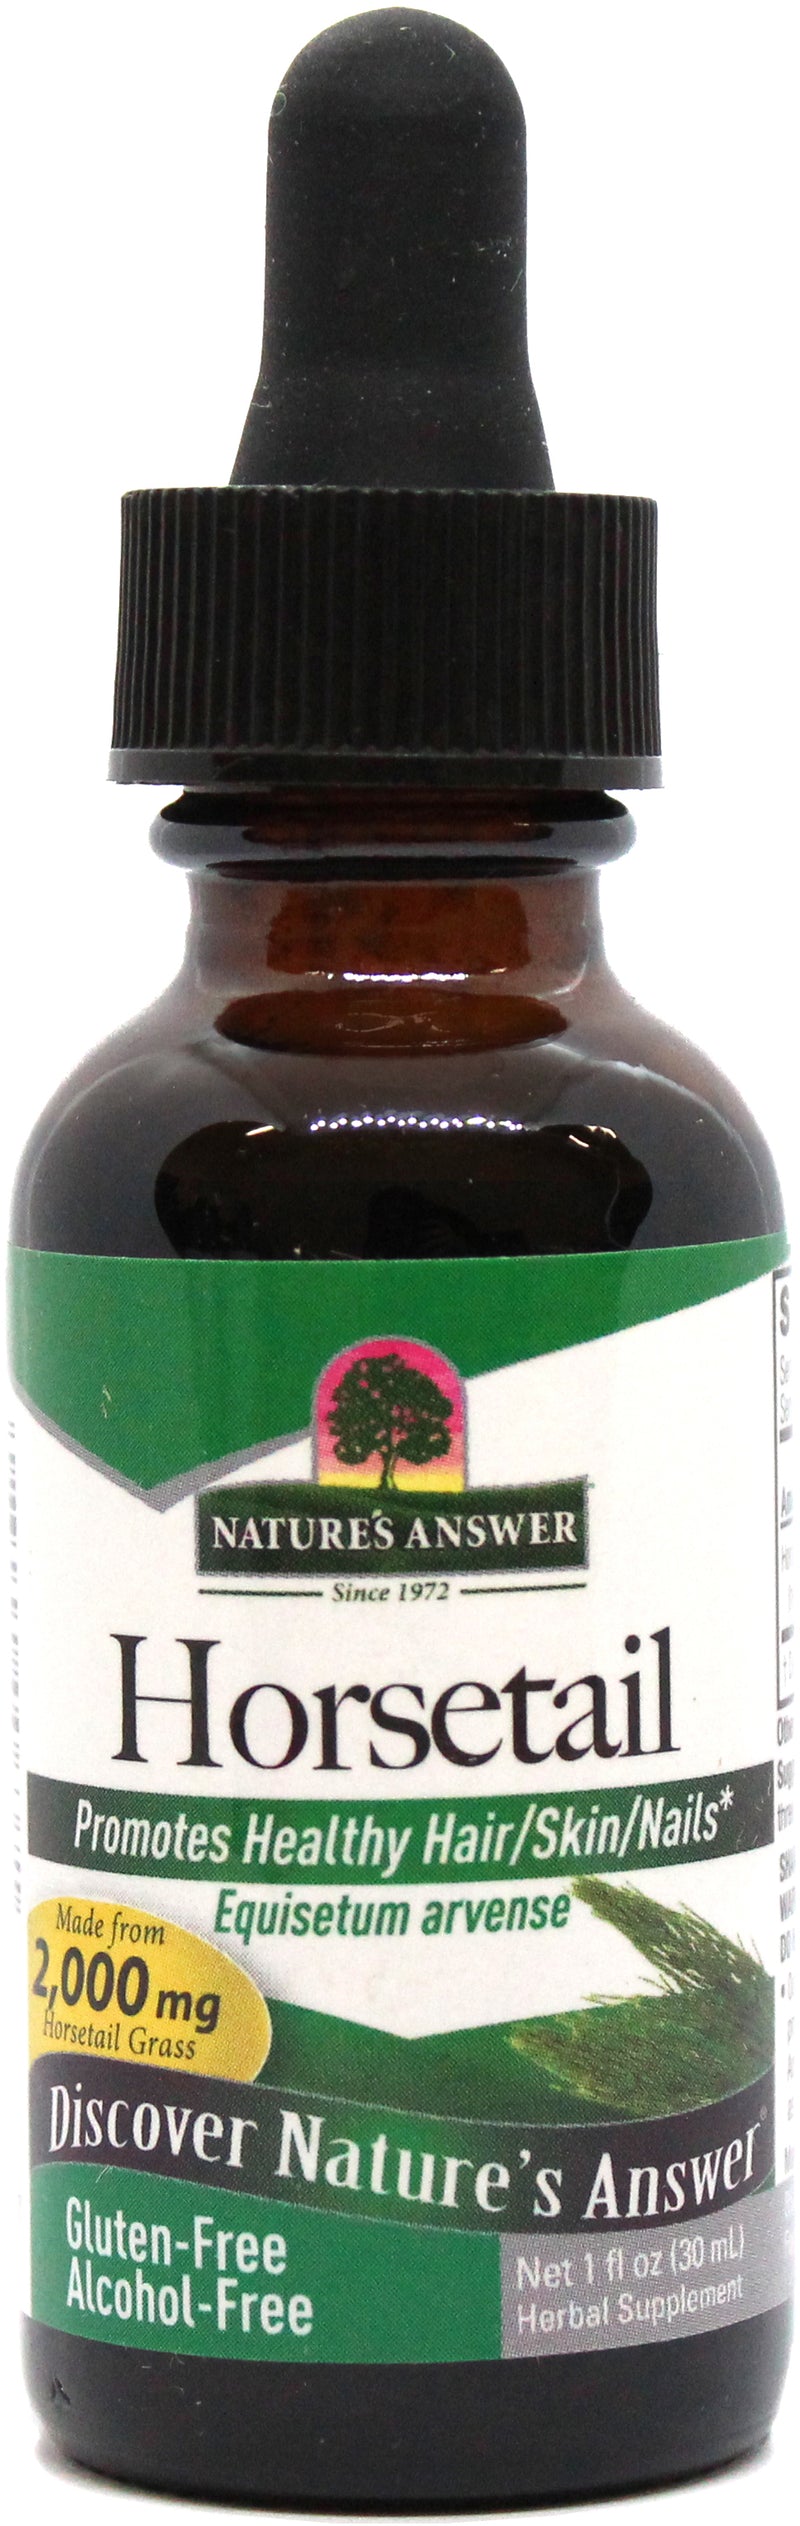 Nature’s Answer Horsetail Herb (Alcohol-Free)